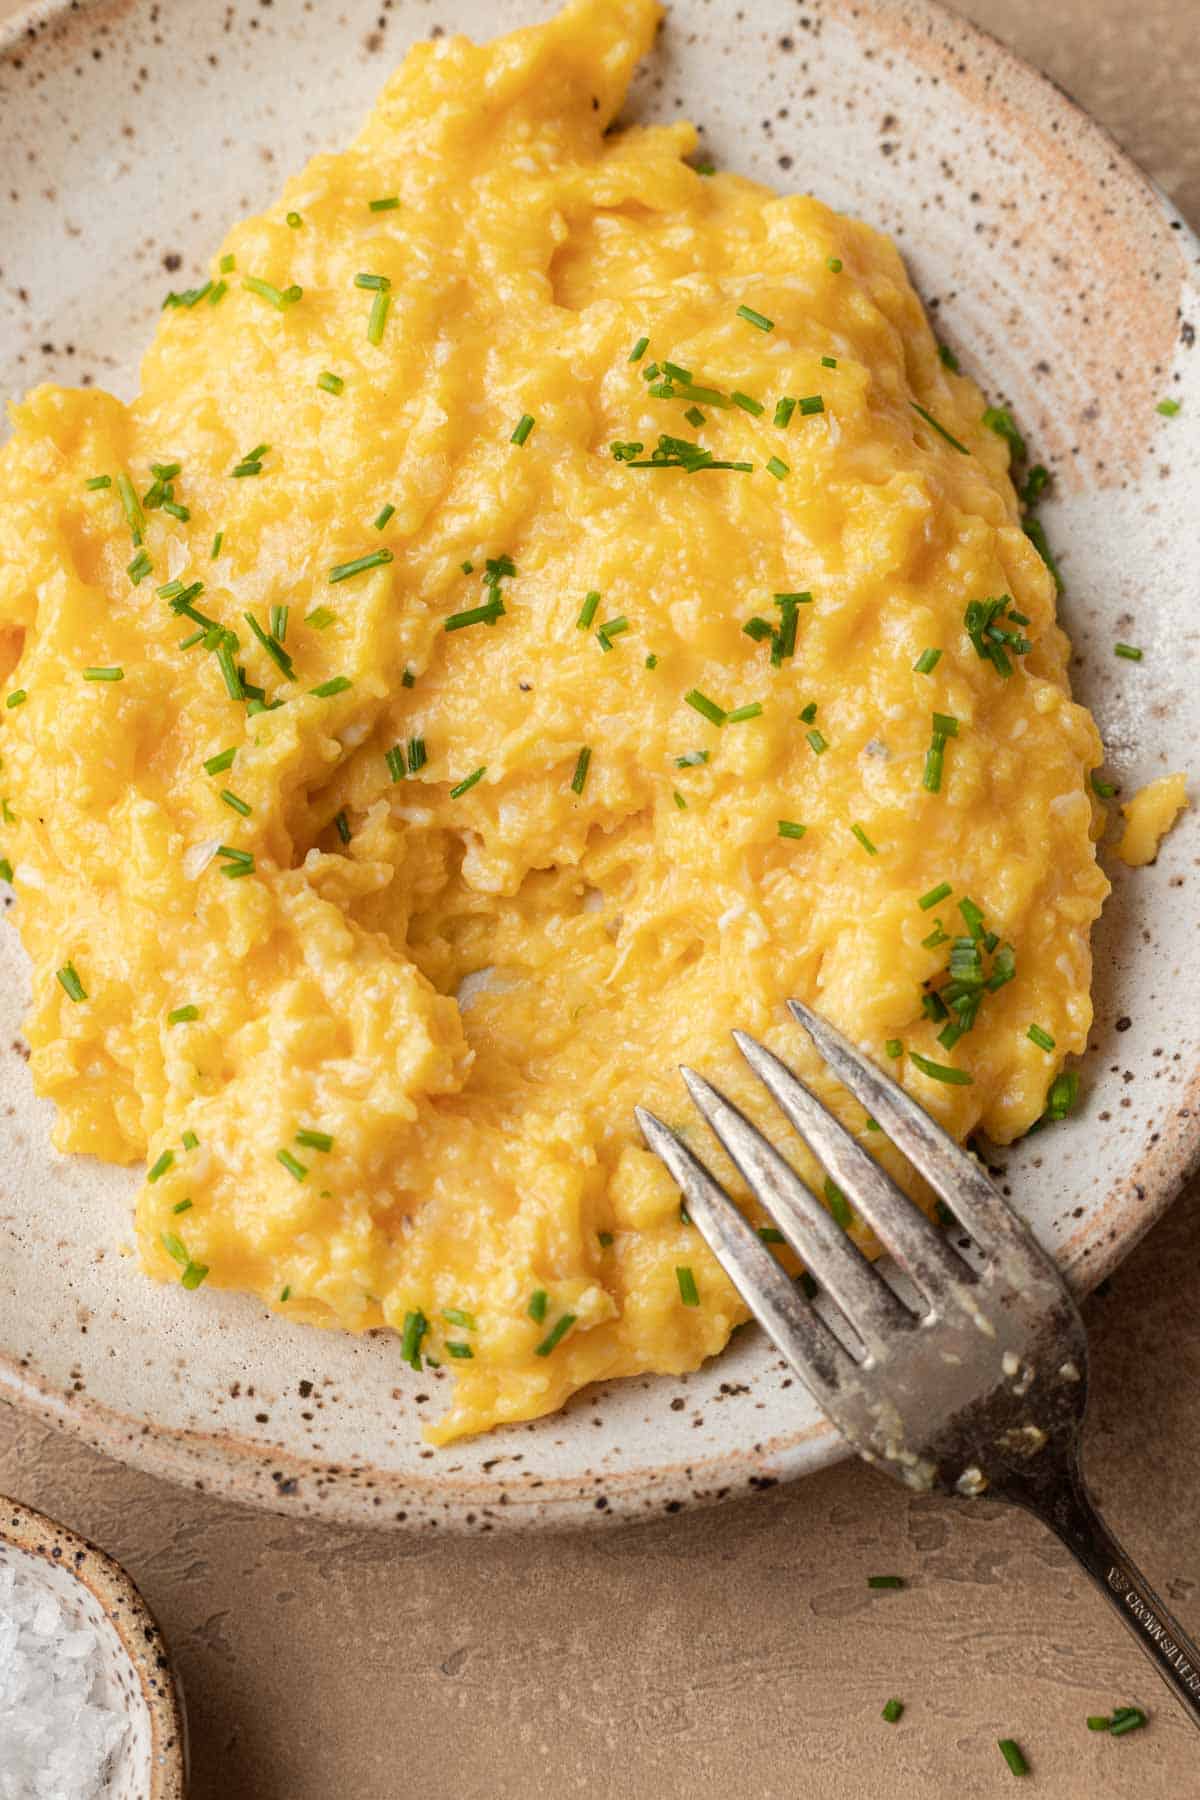 Plate of freshly made cheesy scrambled eggs with chives sprinkled on top and a fork prepped for your first bite.